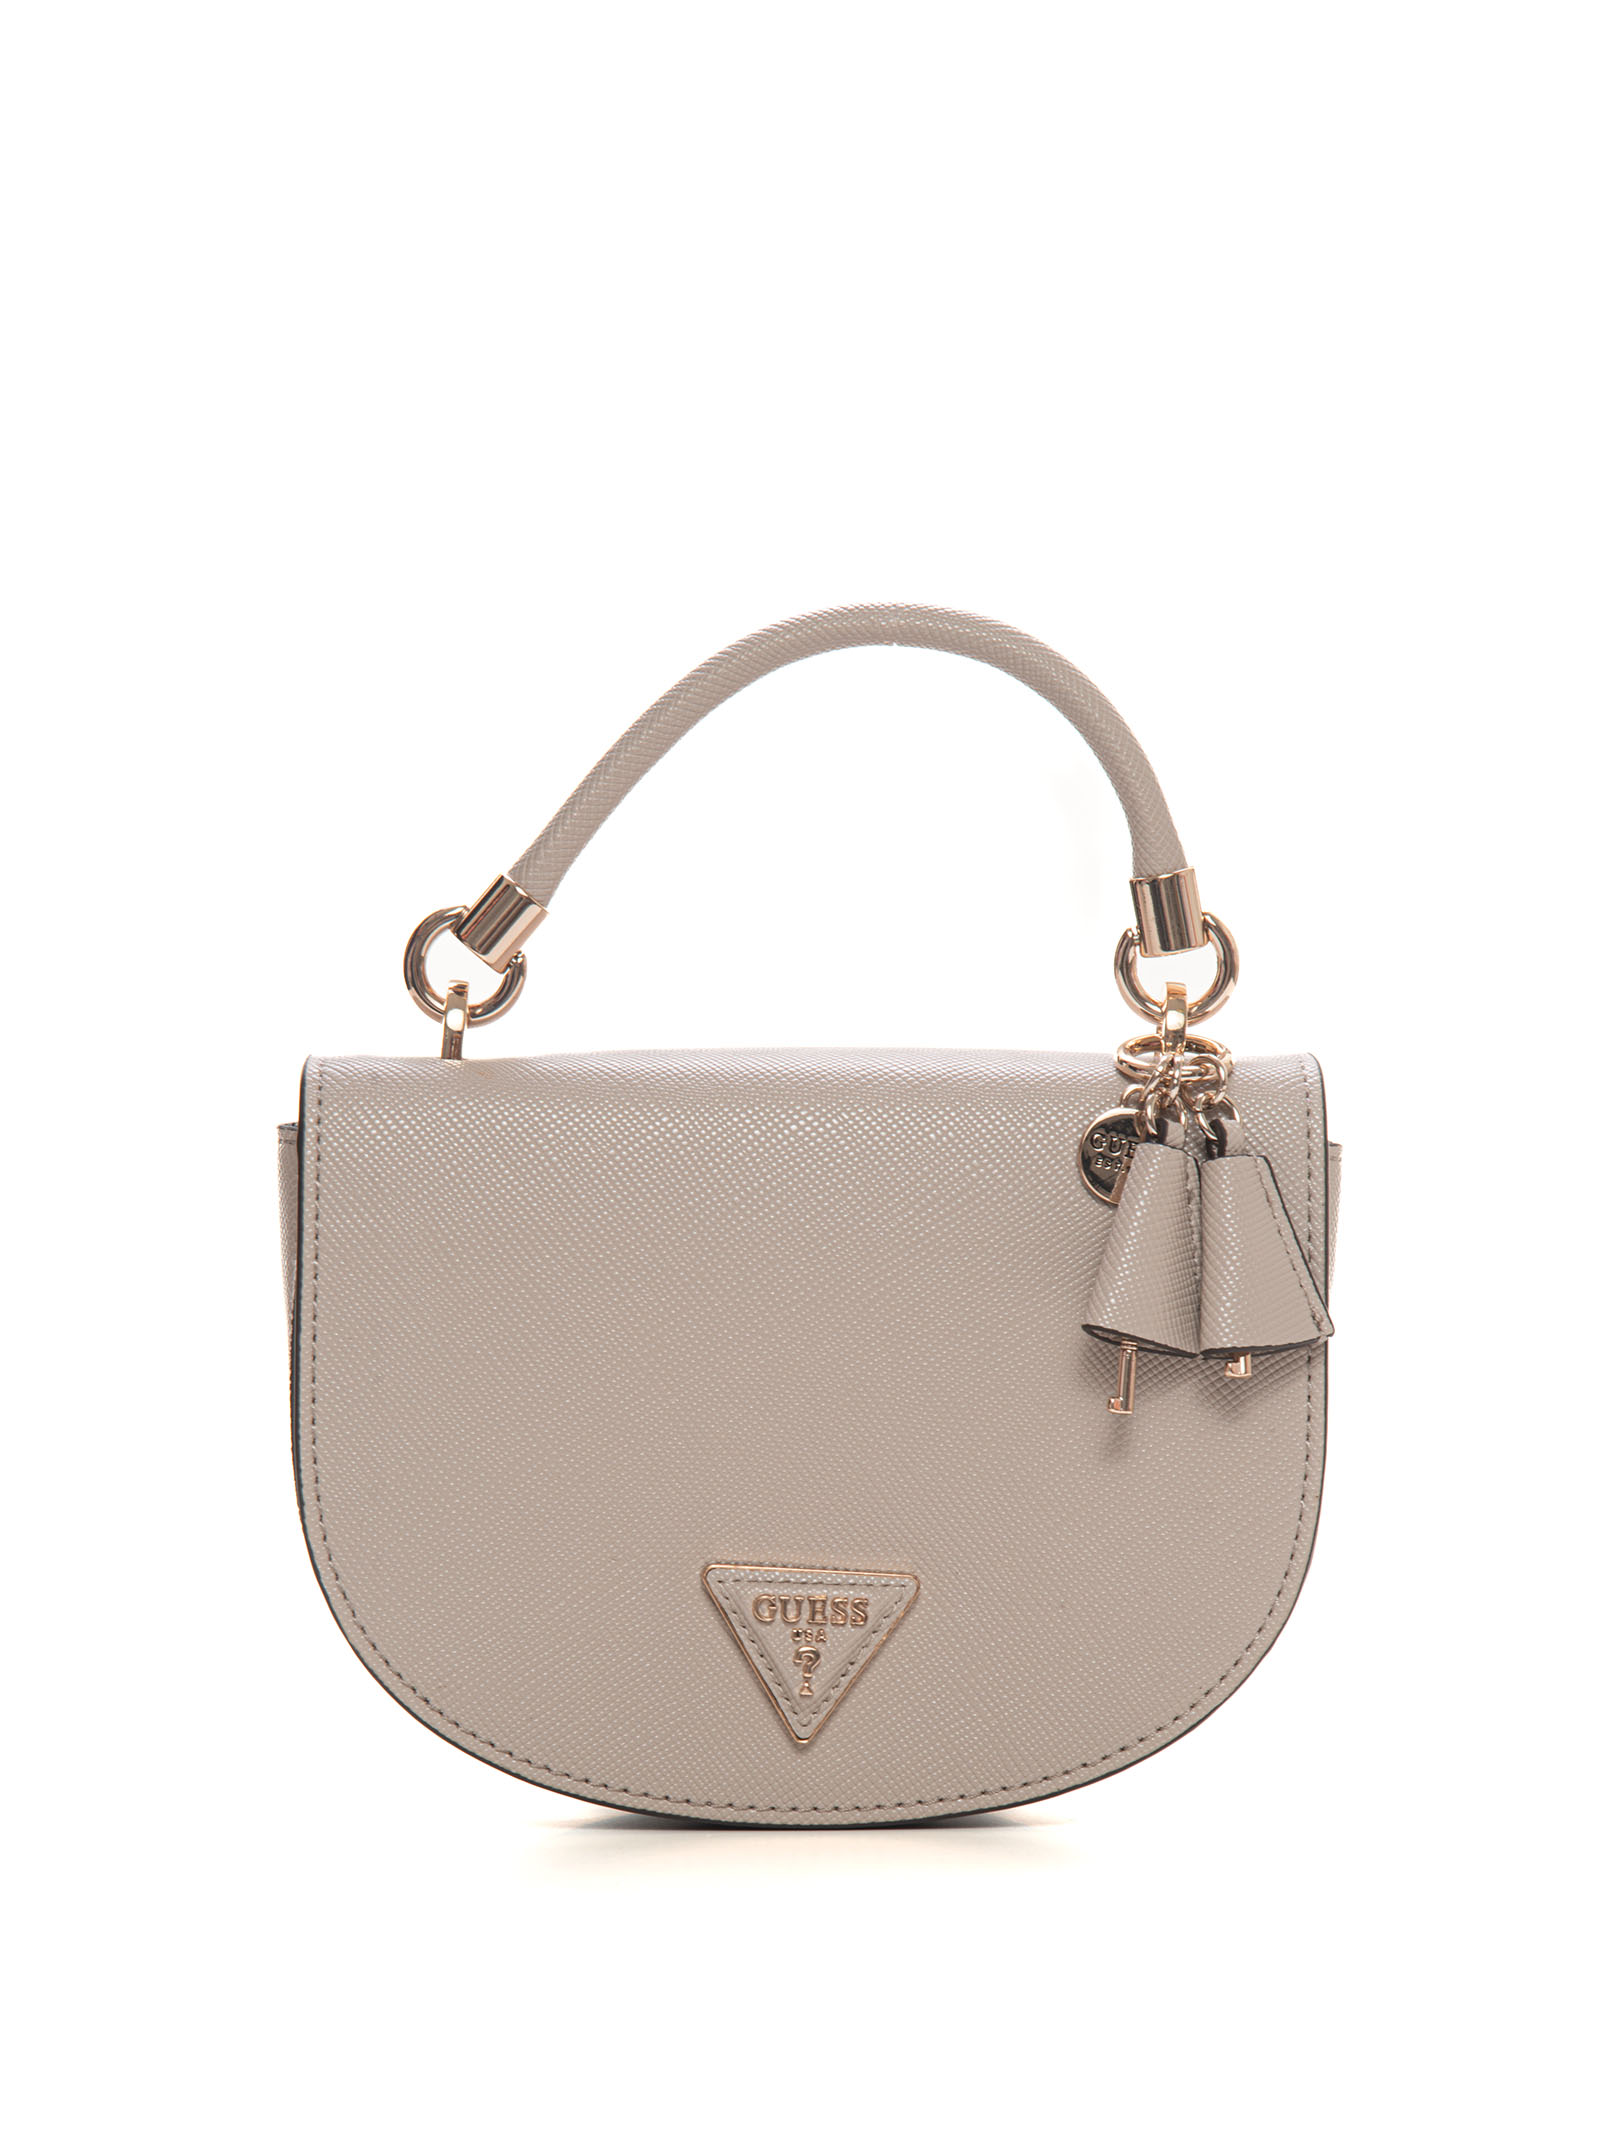 Guess Gizele  Small Bag In Sand  